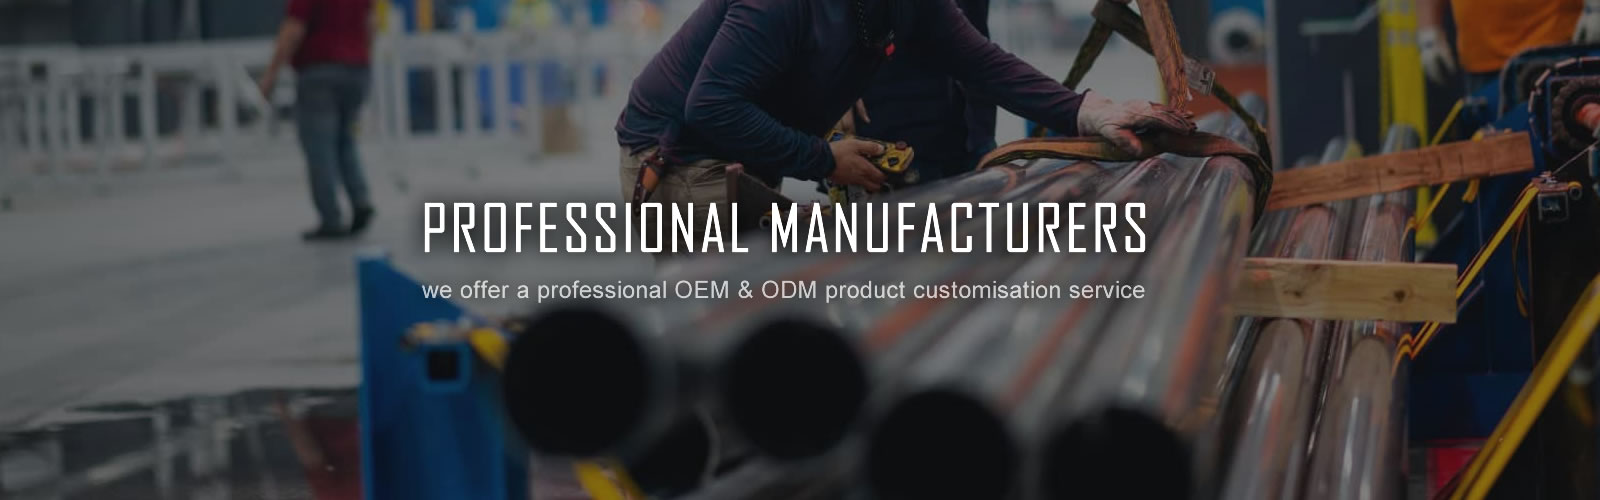 Professional manufacturers